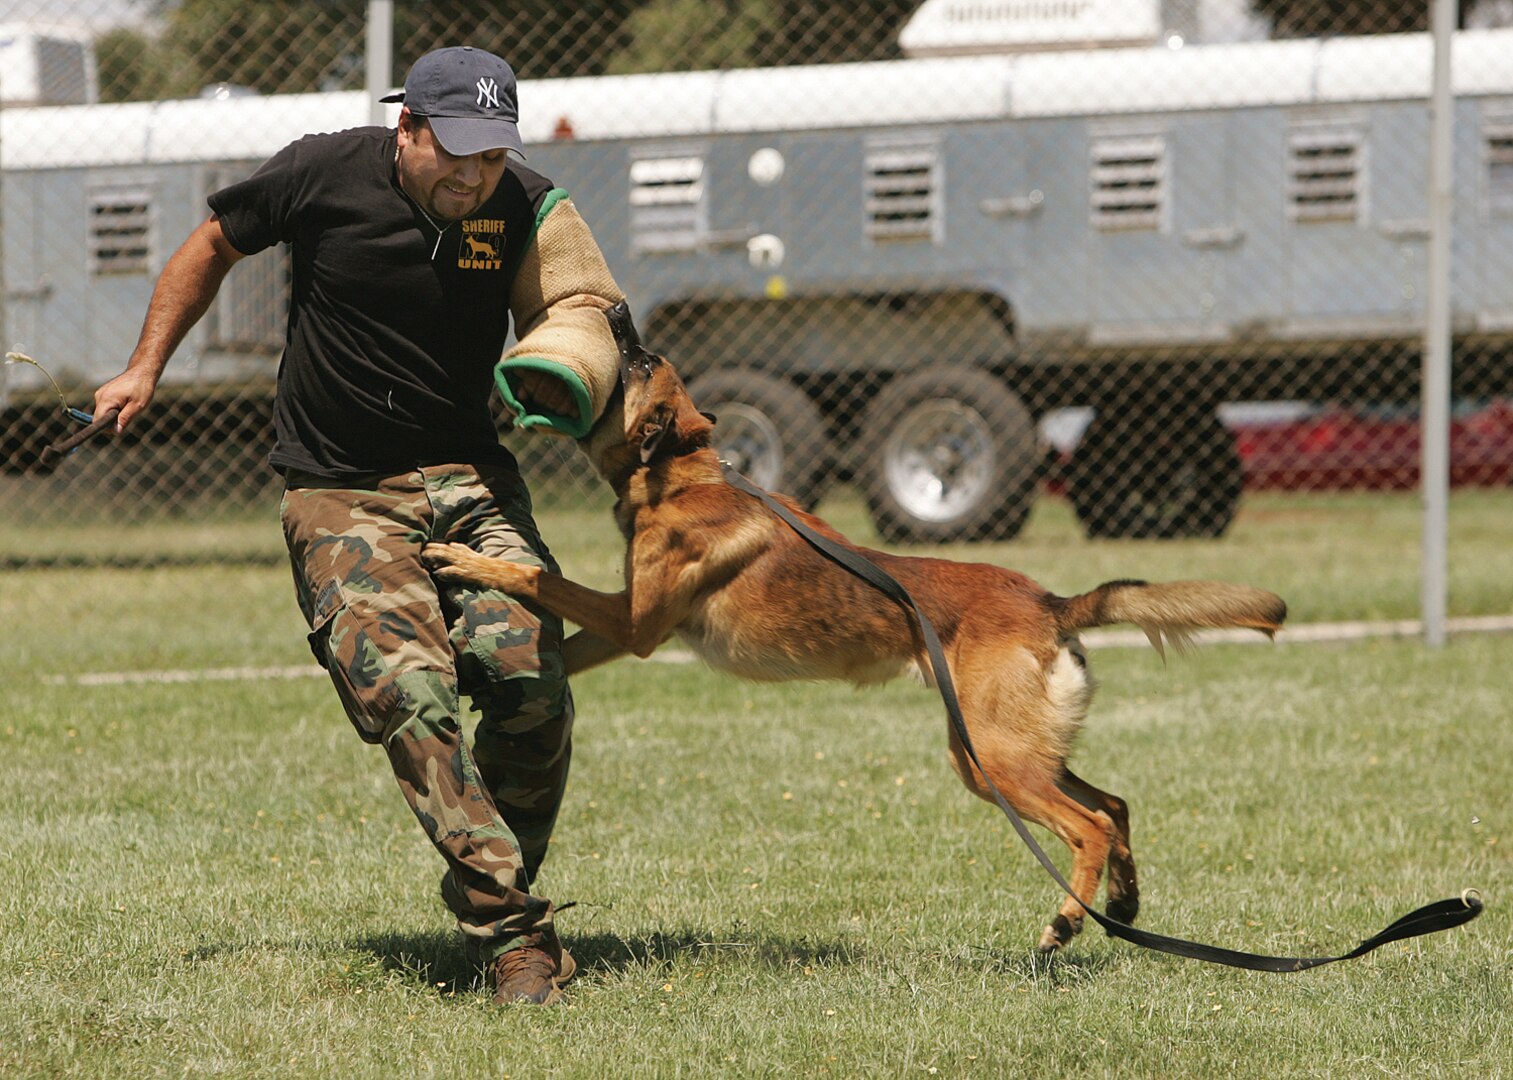 9/5/2008 - Arturo Terrazas, a dog handler with the 341st Training Squadron, and Rrolfe demonstrate some attack tactics Sept. 5. The 341st TRS provides trained military working dogs and handlers for the Department of Defense and other government agencies for security efforts worldwide. (USAF photo by Robbin Cresswell)    